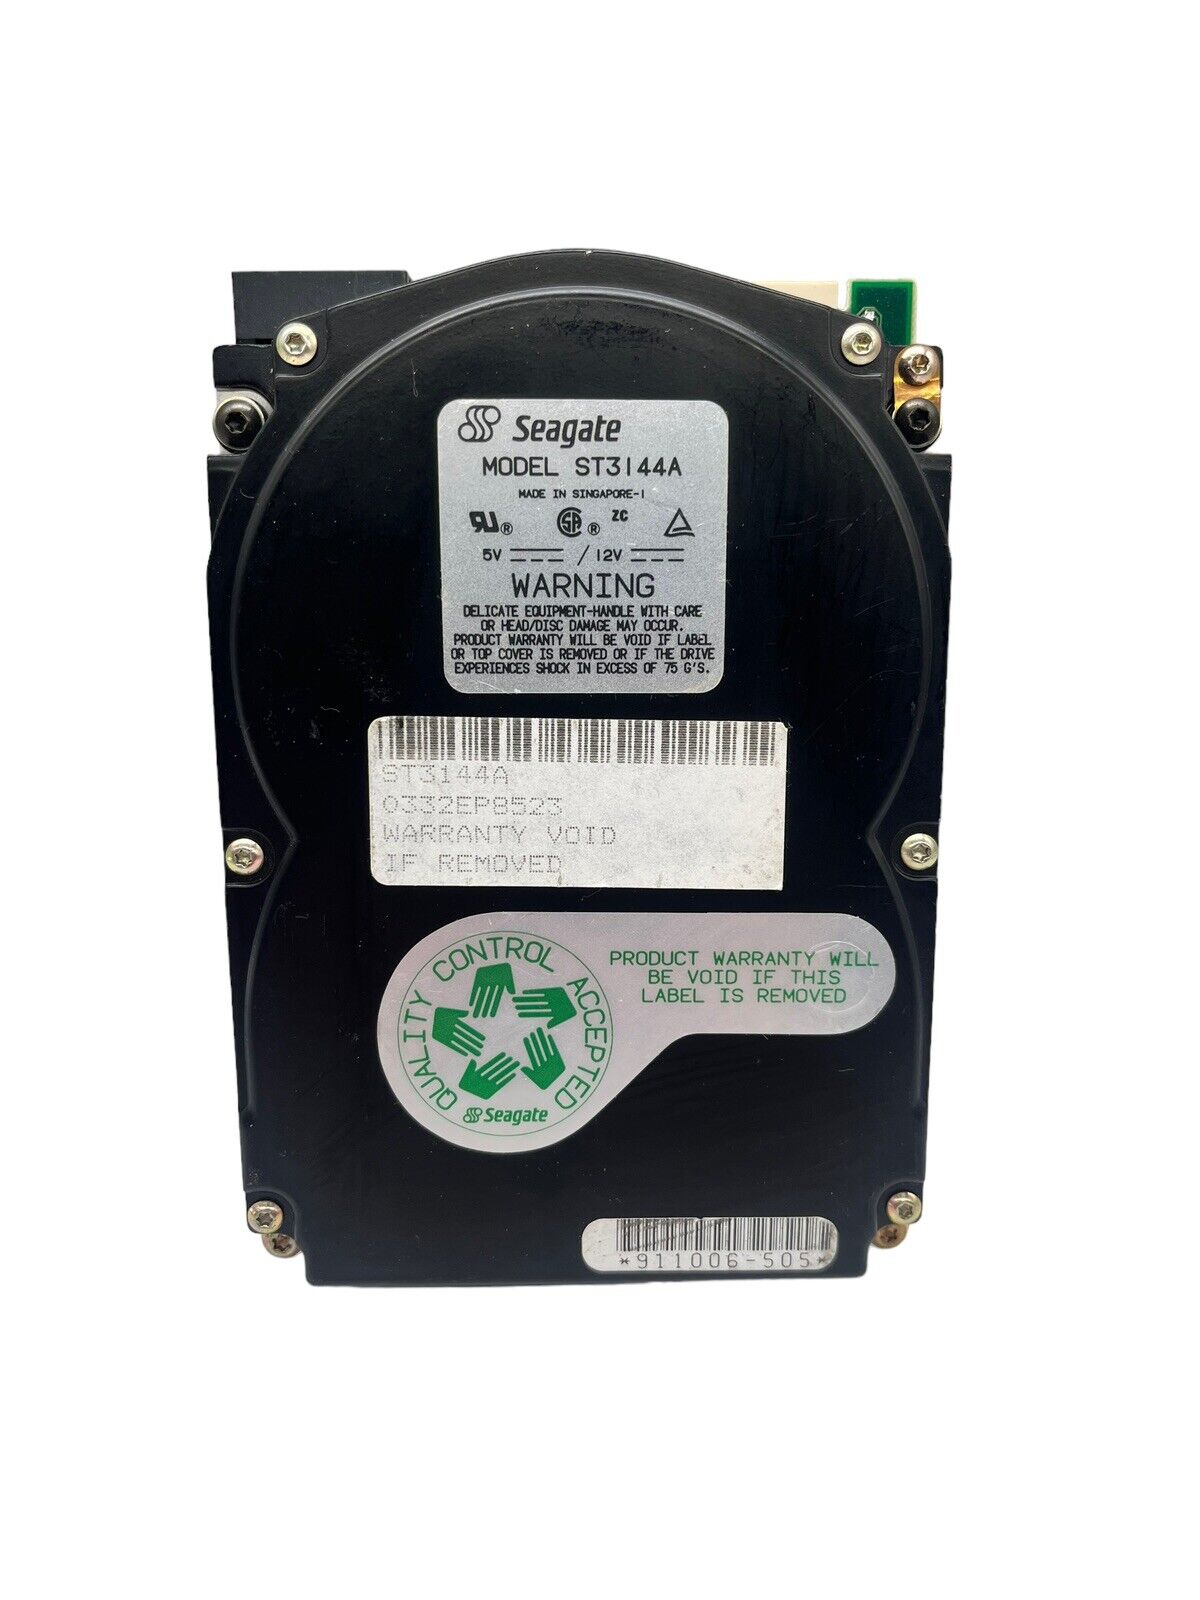 Seagate Model ST3144A 130Mb  3.5